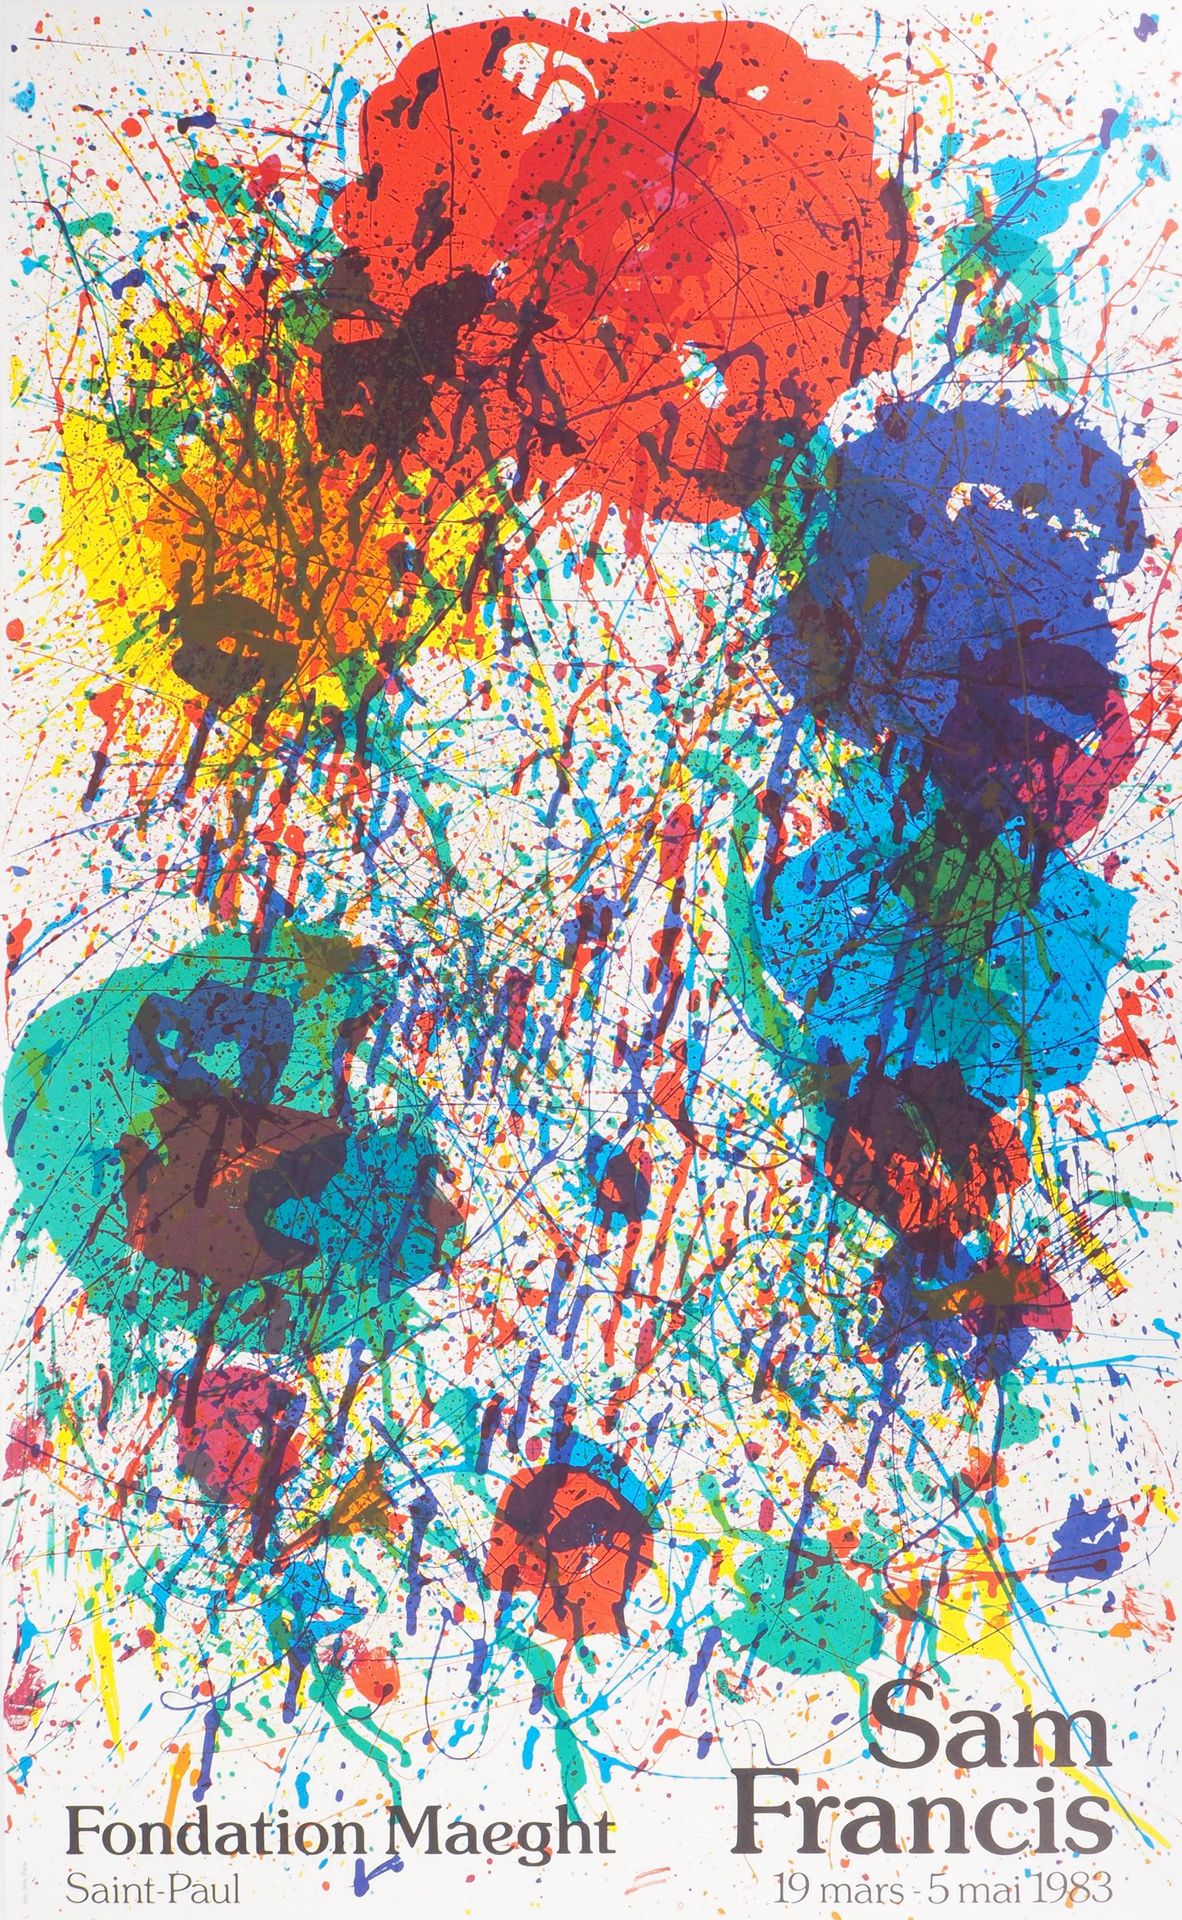 Sam FRANCIS Sam FRANCIS

Explosion of colors

Original lithographic poster of th&hellip;